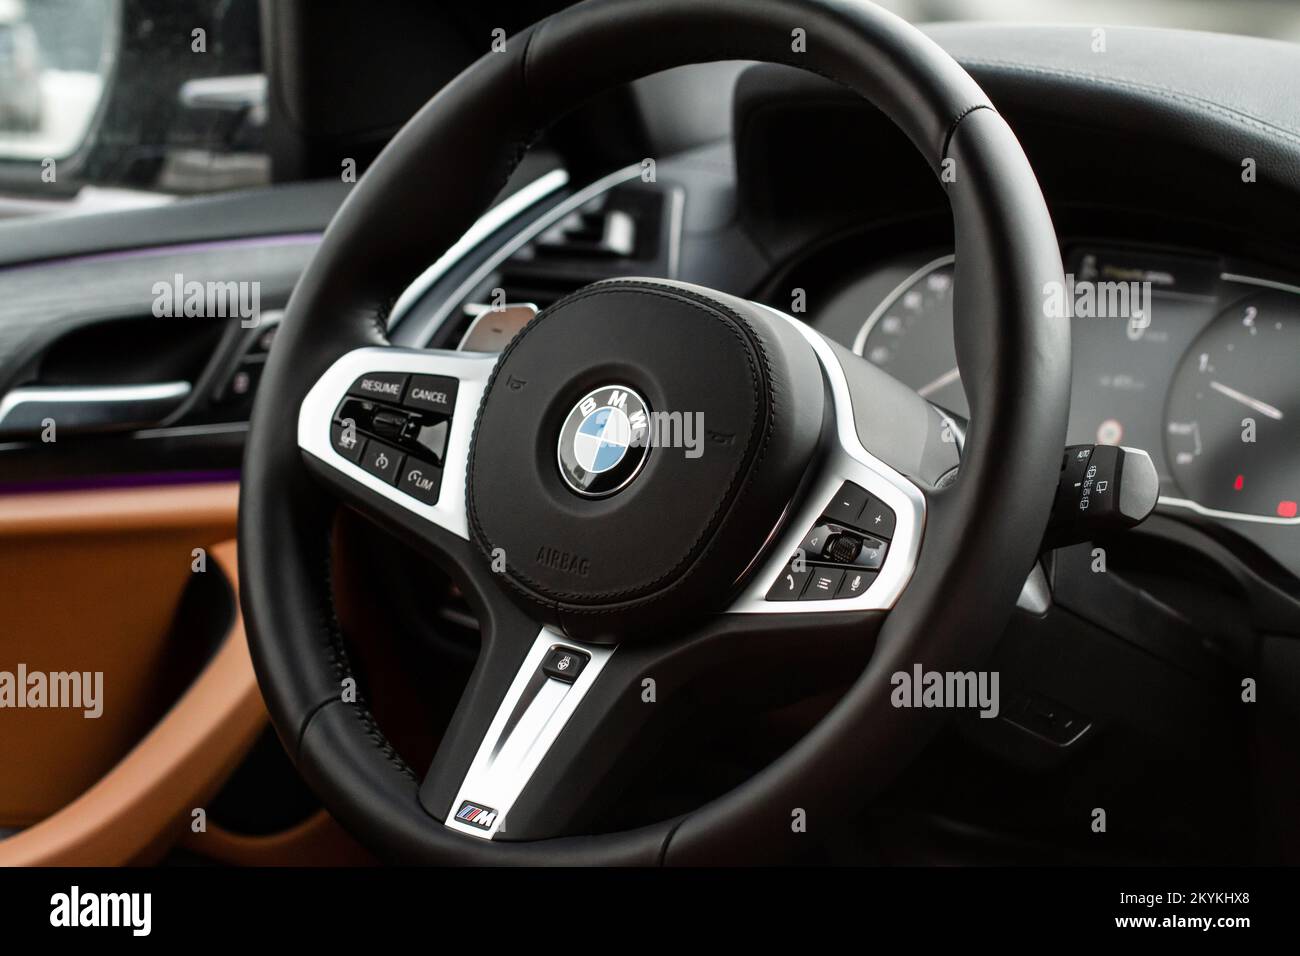 MOSCOW, RUSSIA - FEBRUARY 05, 2022 BMW X3 steering wheel close up view. BMW logotype on the car steering wheel. Modern car interior design. Stock Photo